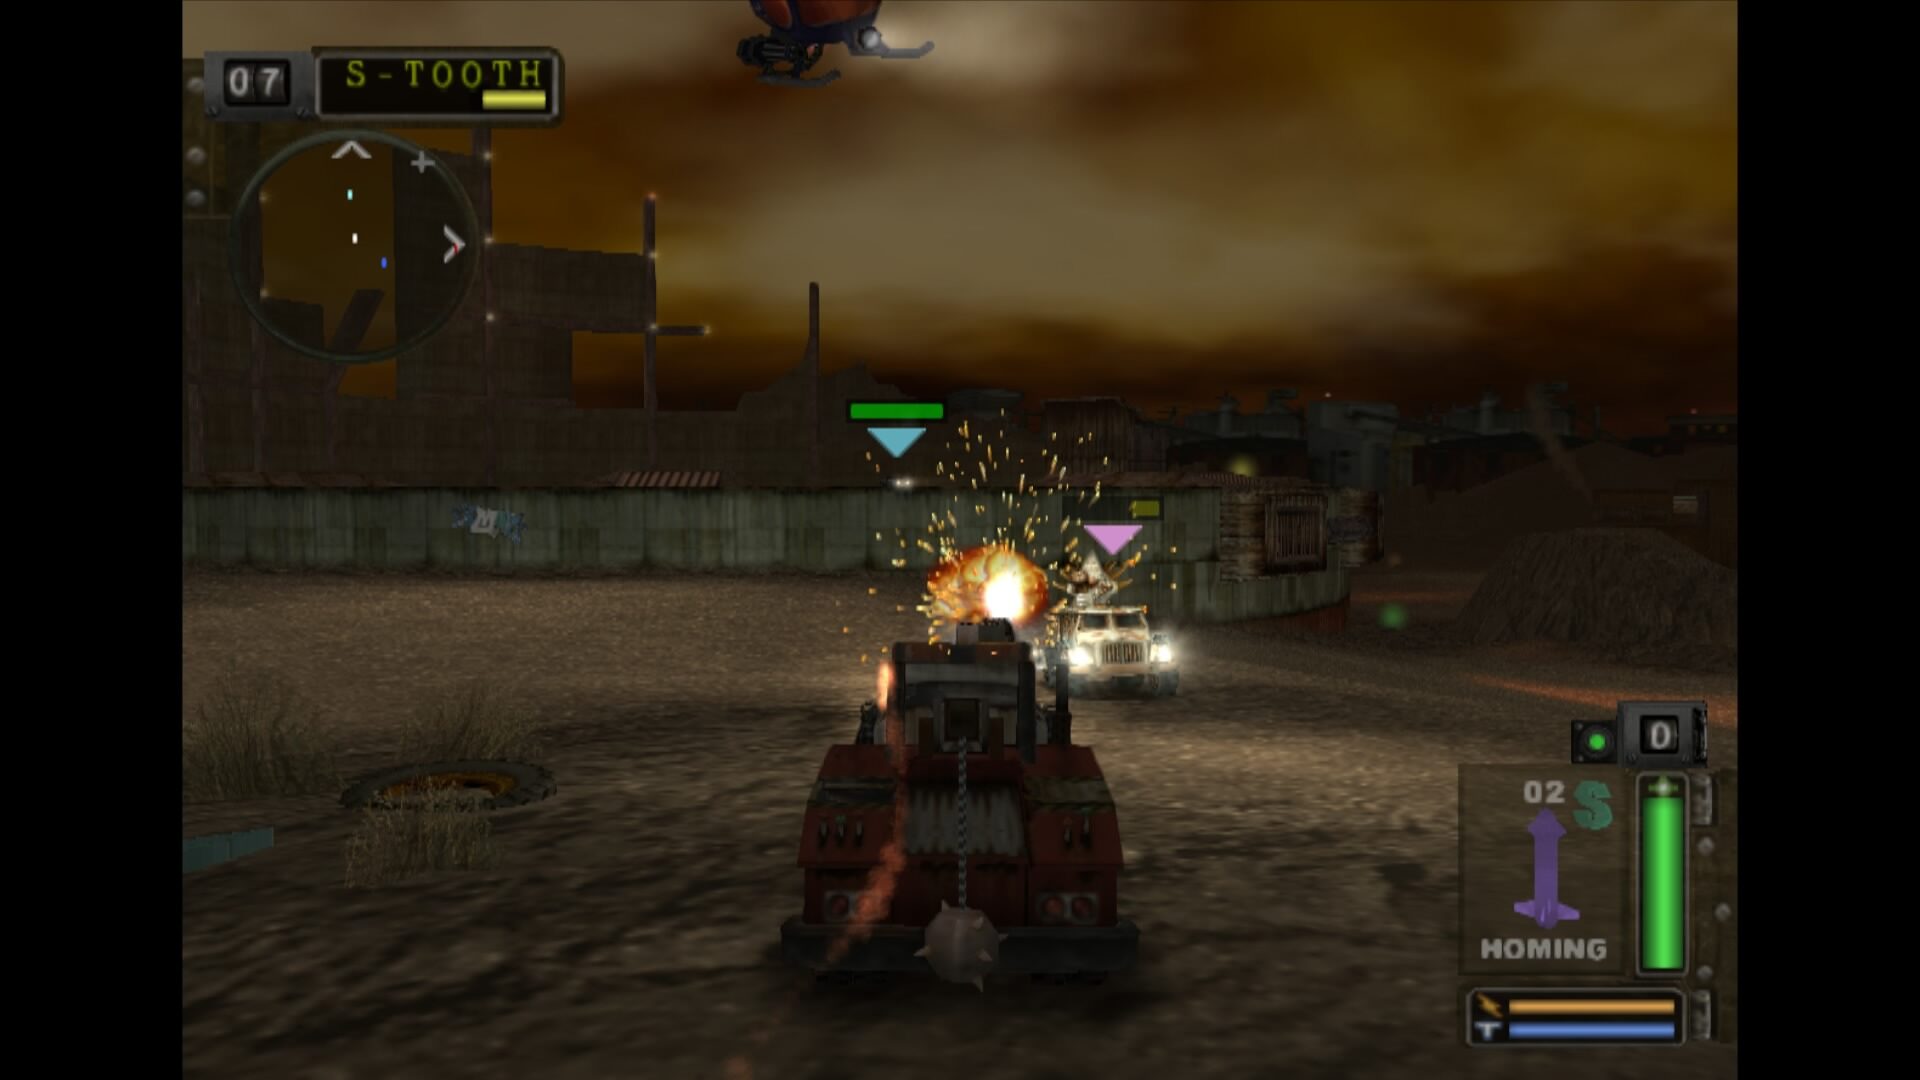 Twisted Metal: Black - PS2 Gameplay 1080p (PCSX2) 